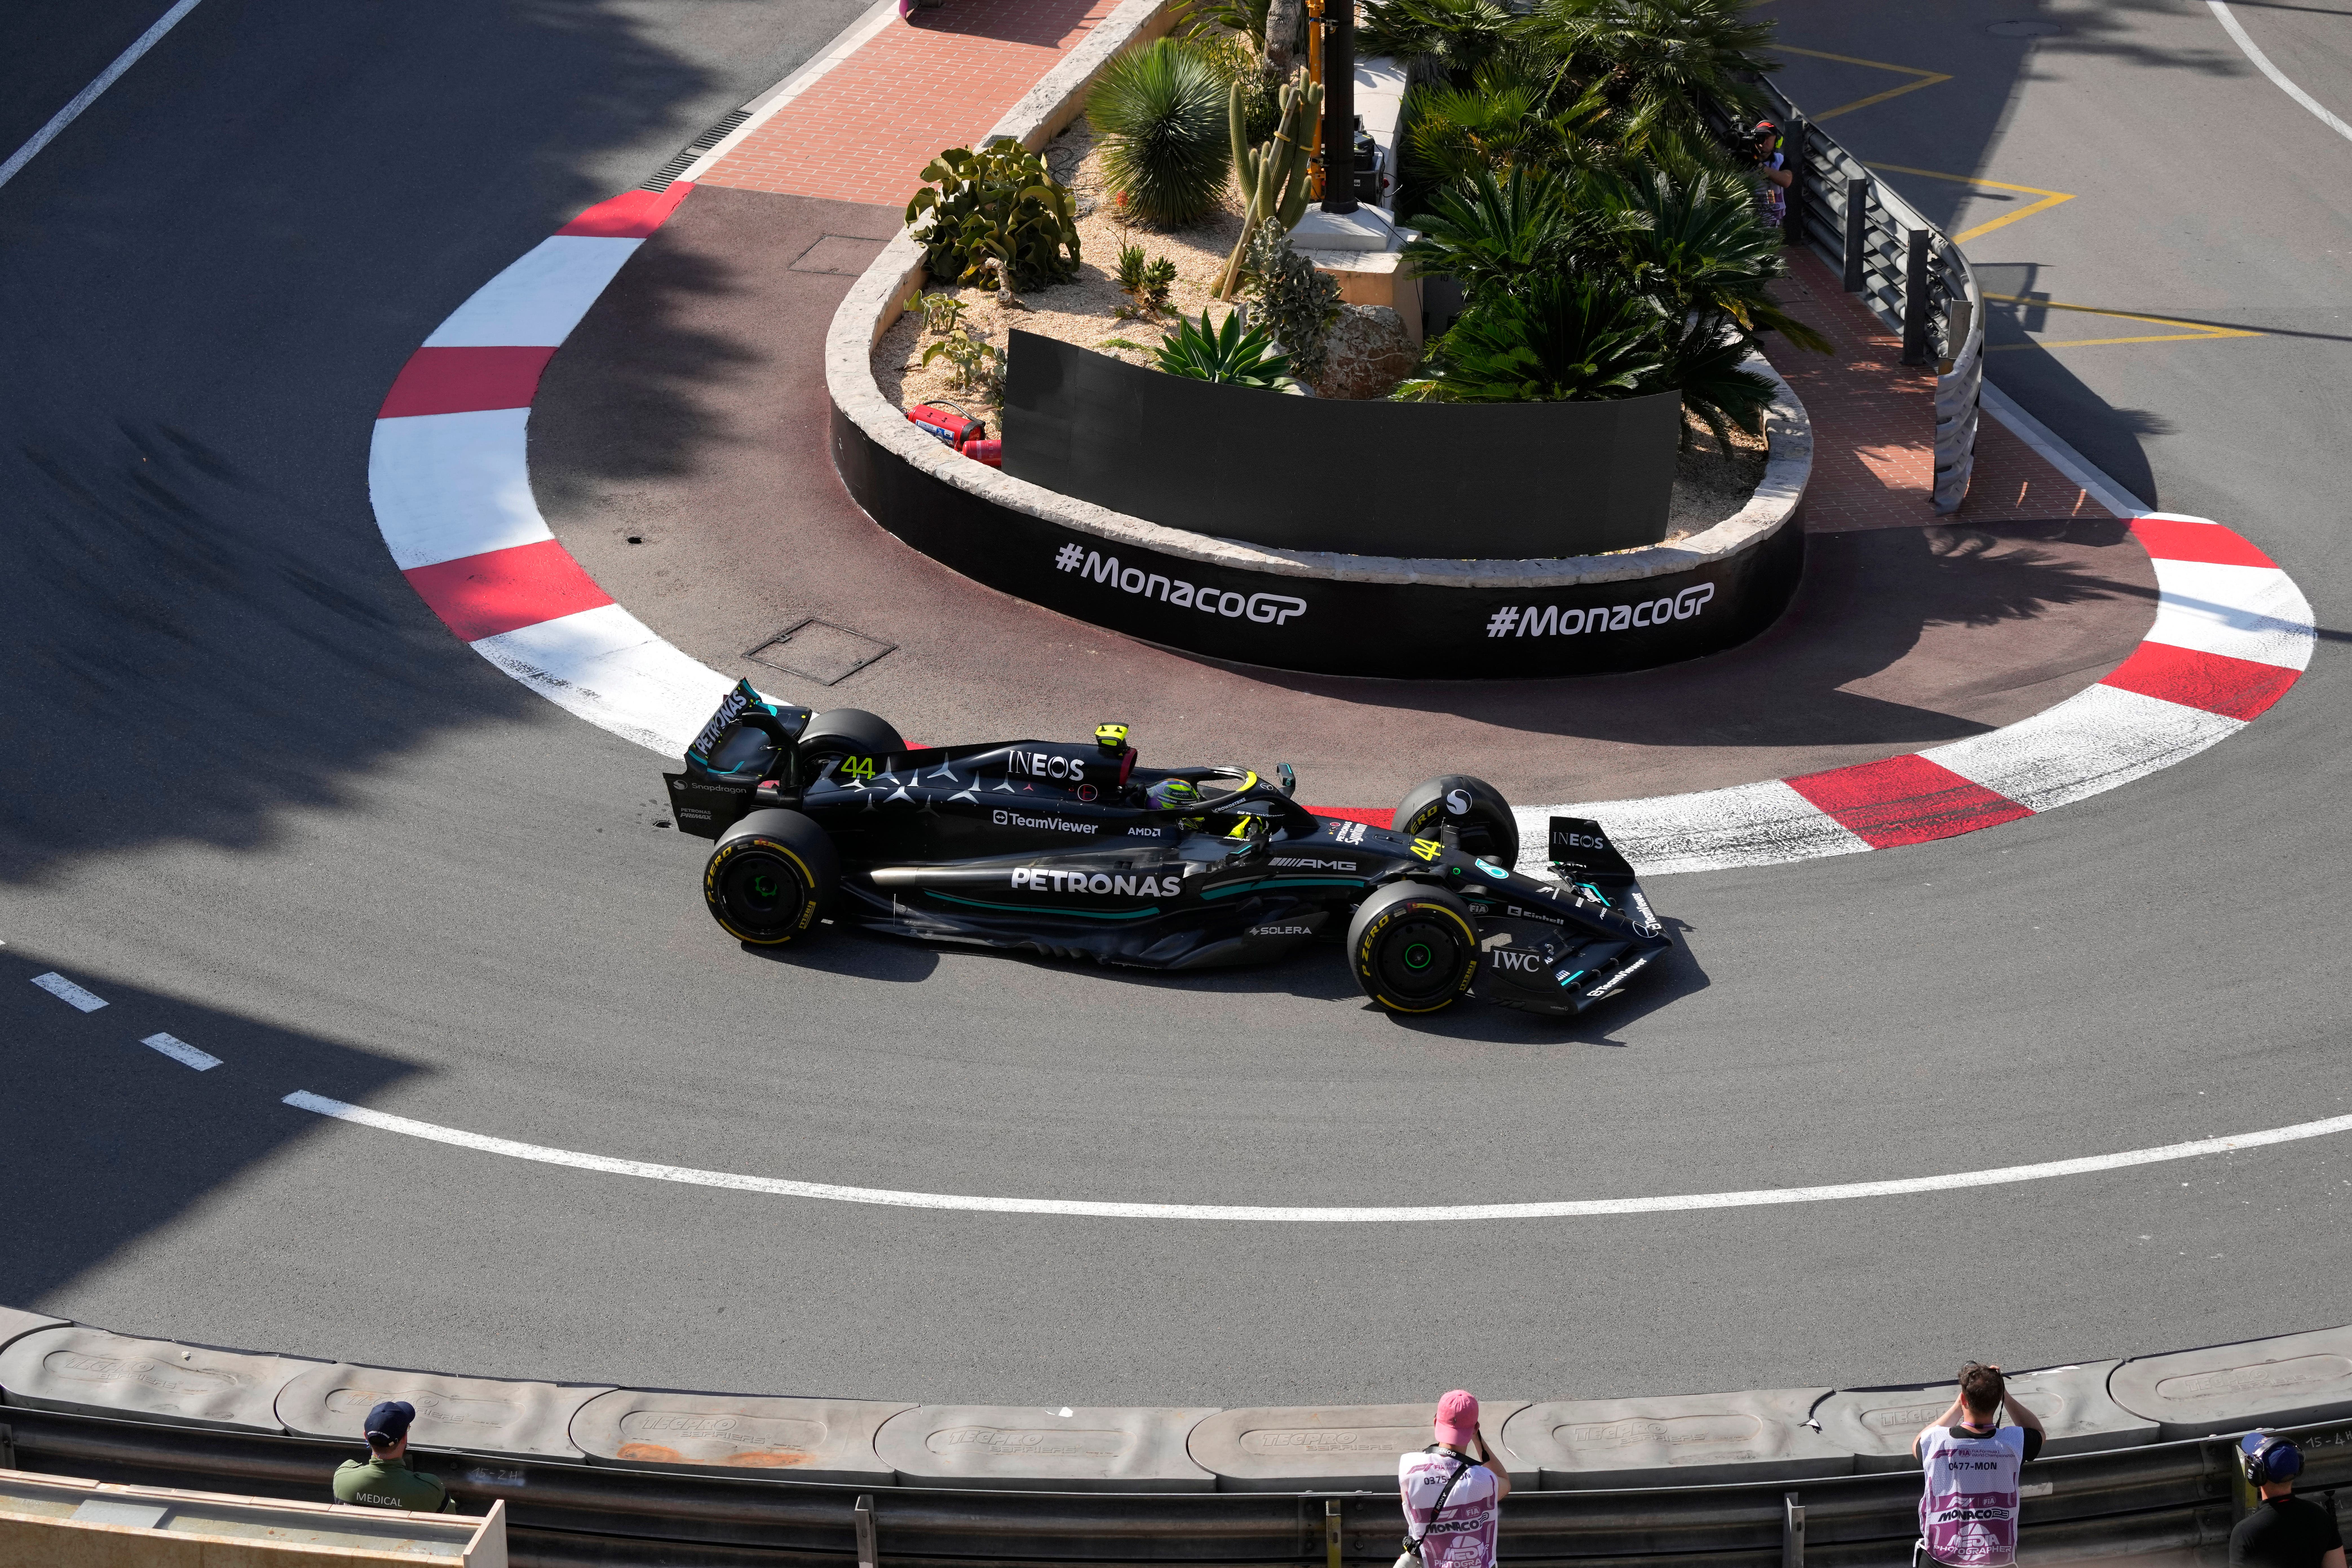 Lewis Hamilton says upgraded Mercedes has improved but 'a bit of a shame'  not closer to front at Monaco GP, F1 News